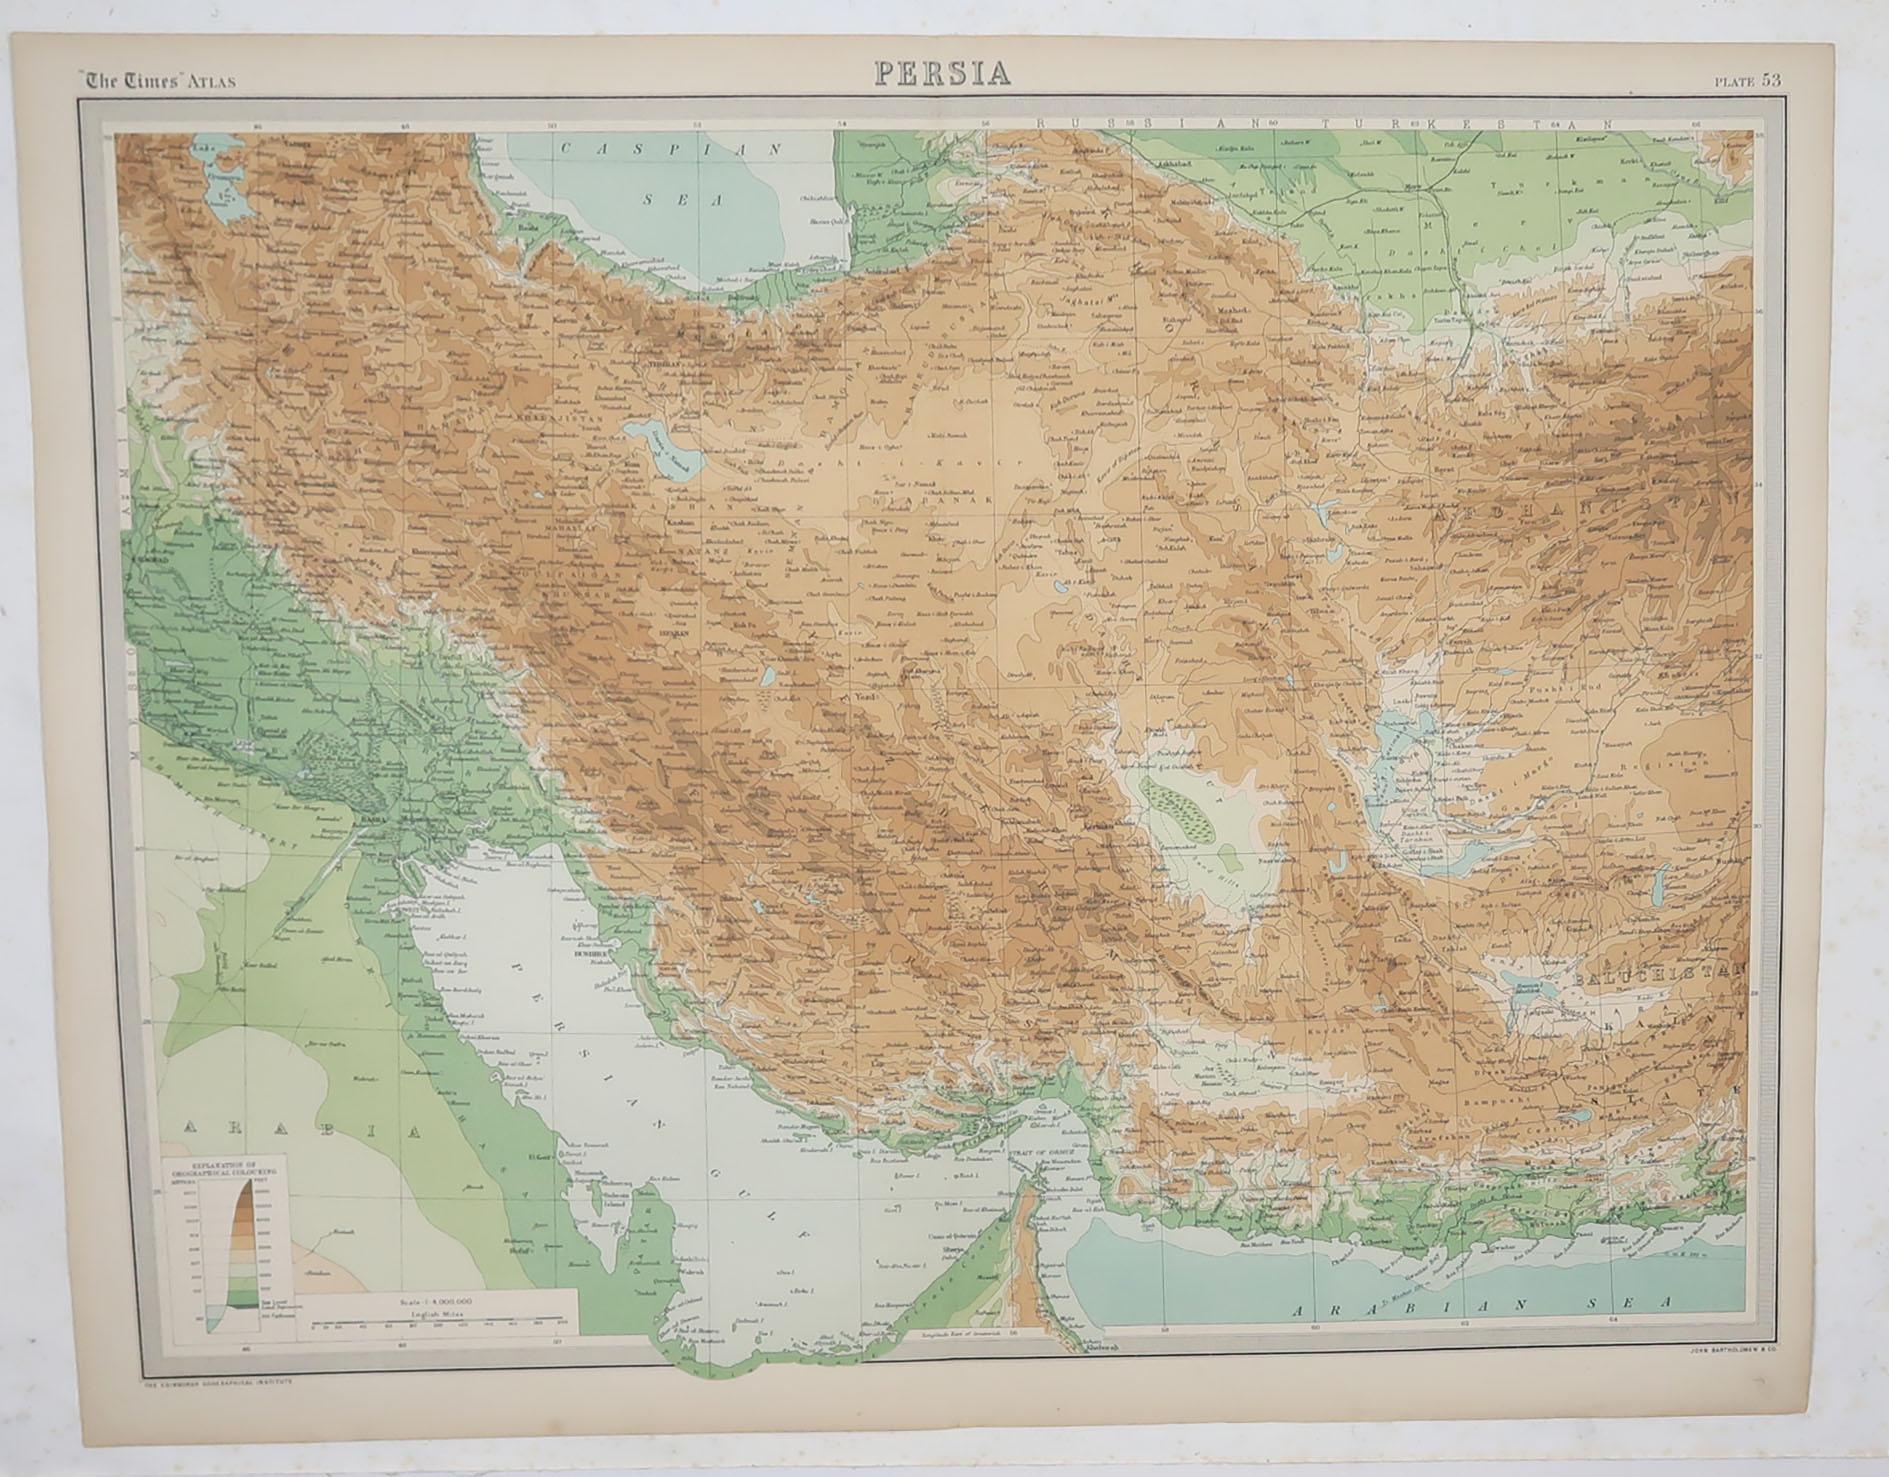 persia on map